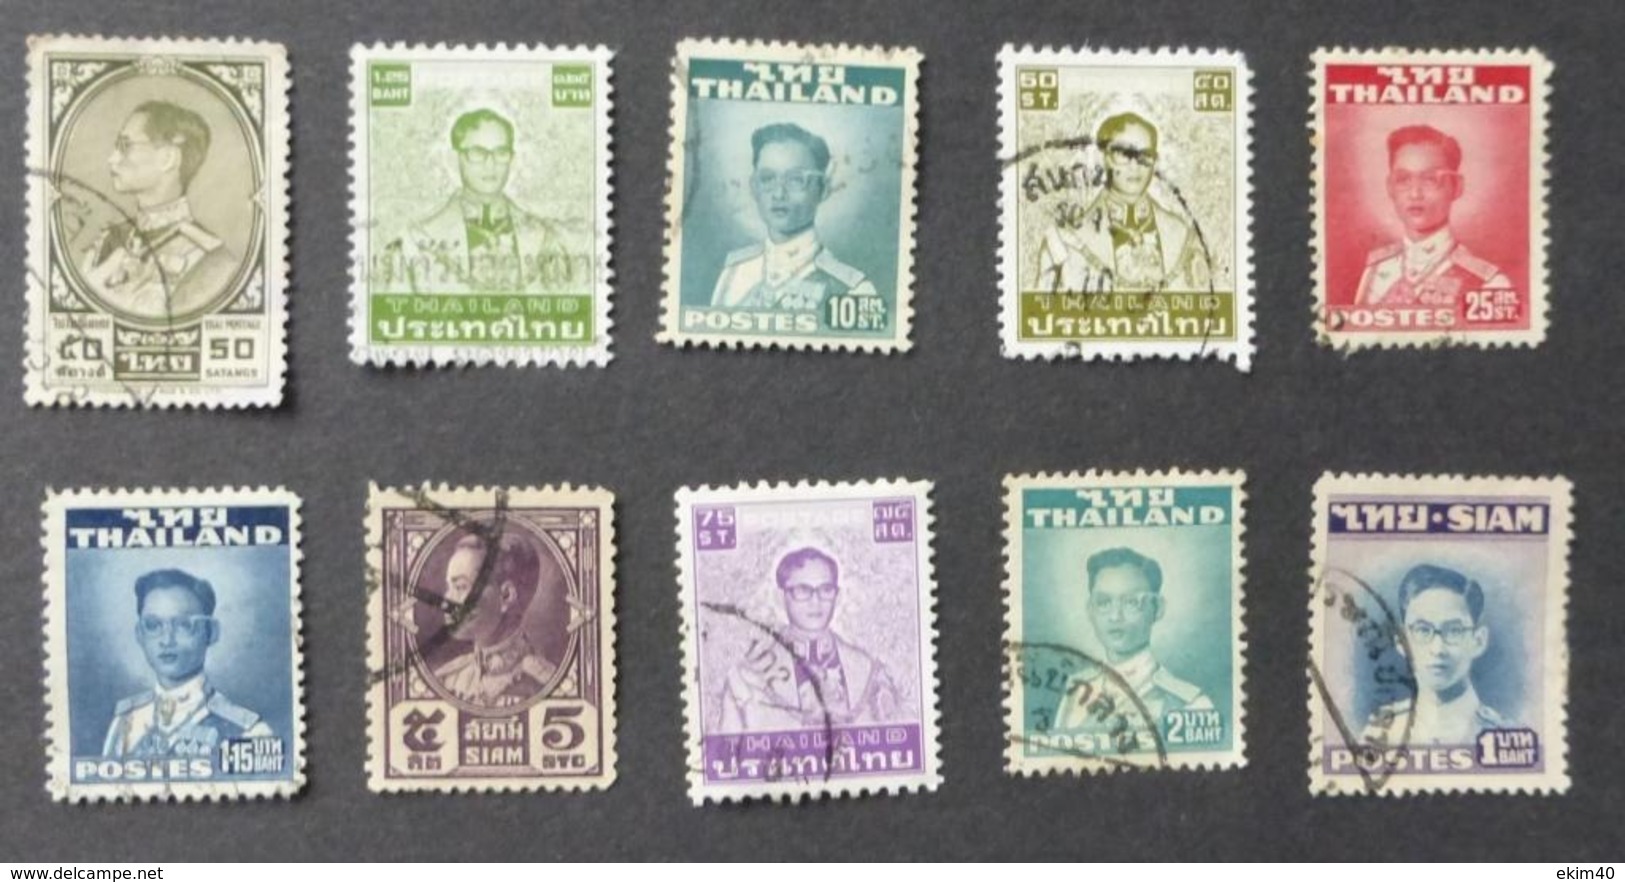 Selection Of Early Thailand/Siam Used/Cancelled Hinged Stamps- Various Issues No DK-606 - Thailand